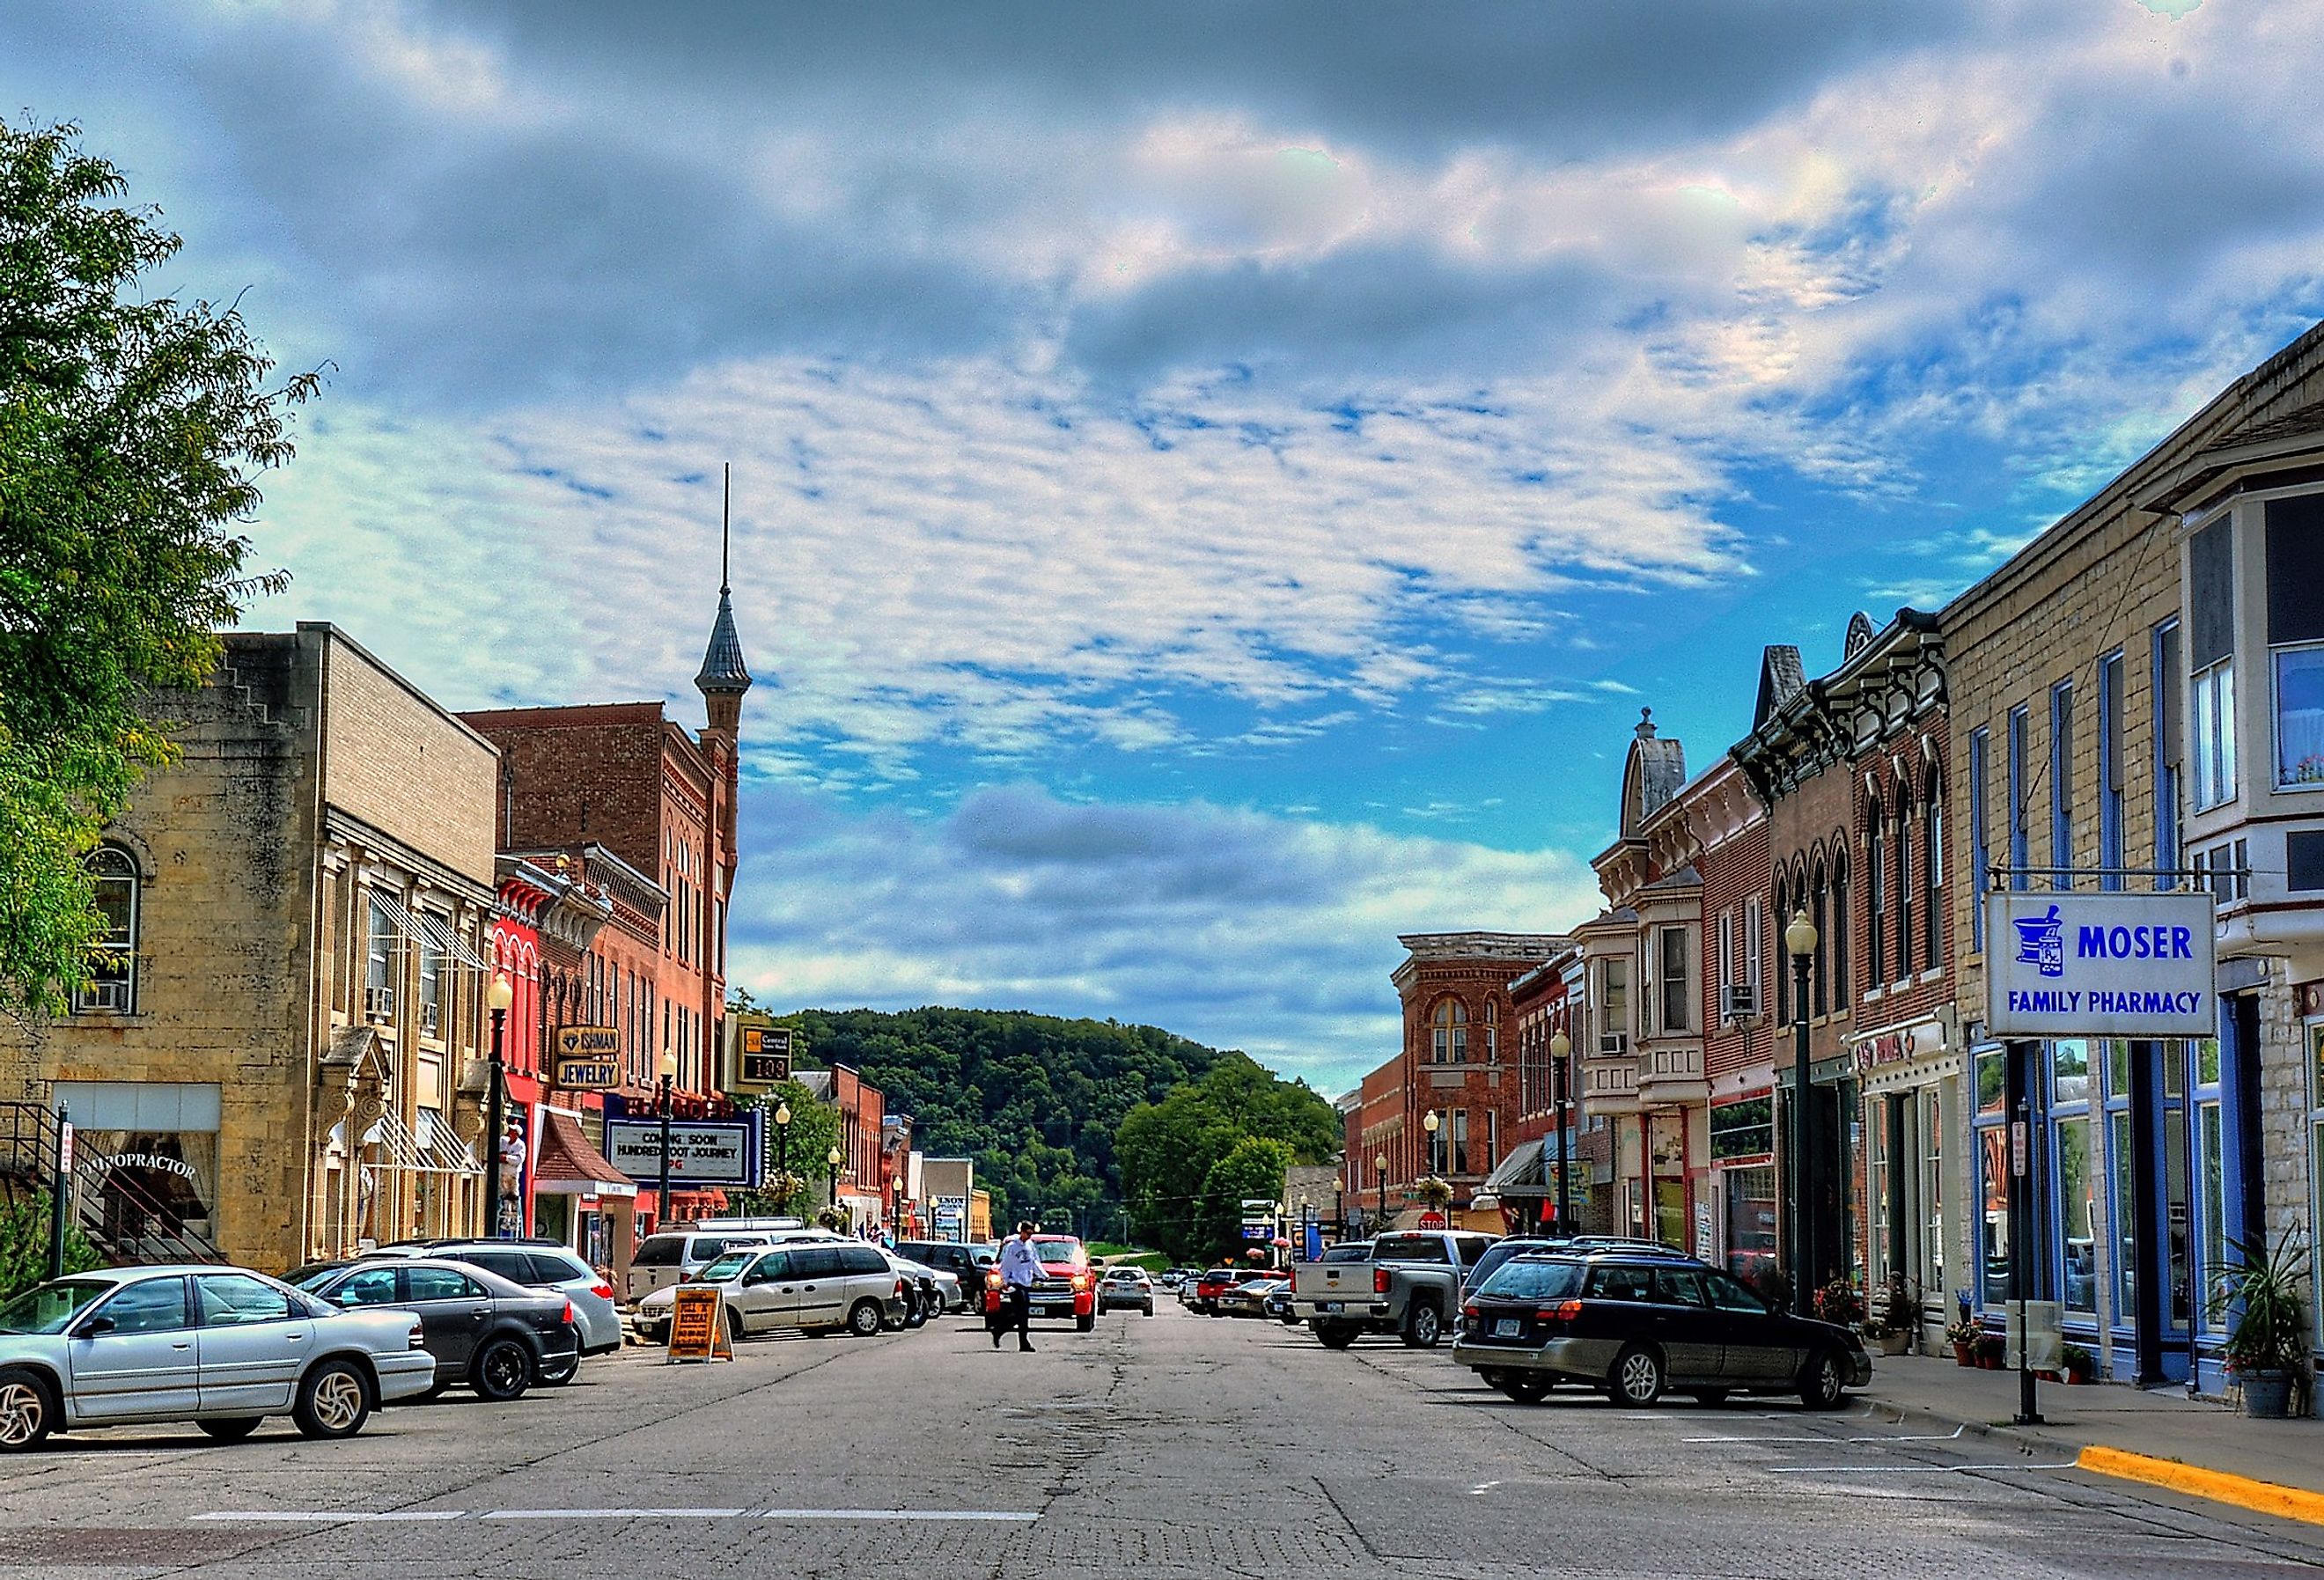 Elkader Downtown Historic District, Iowa. Image credit Kevin Schuchmann, CC BY-SA 3.0 <https://creativecommons.org/licenses/by-sa/3.0>, via Wikimedia Commons